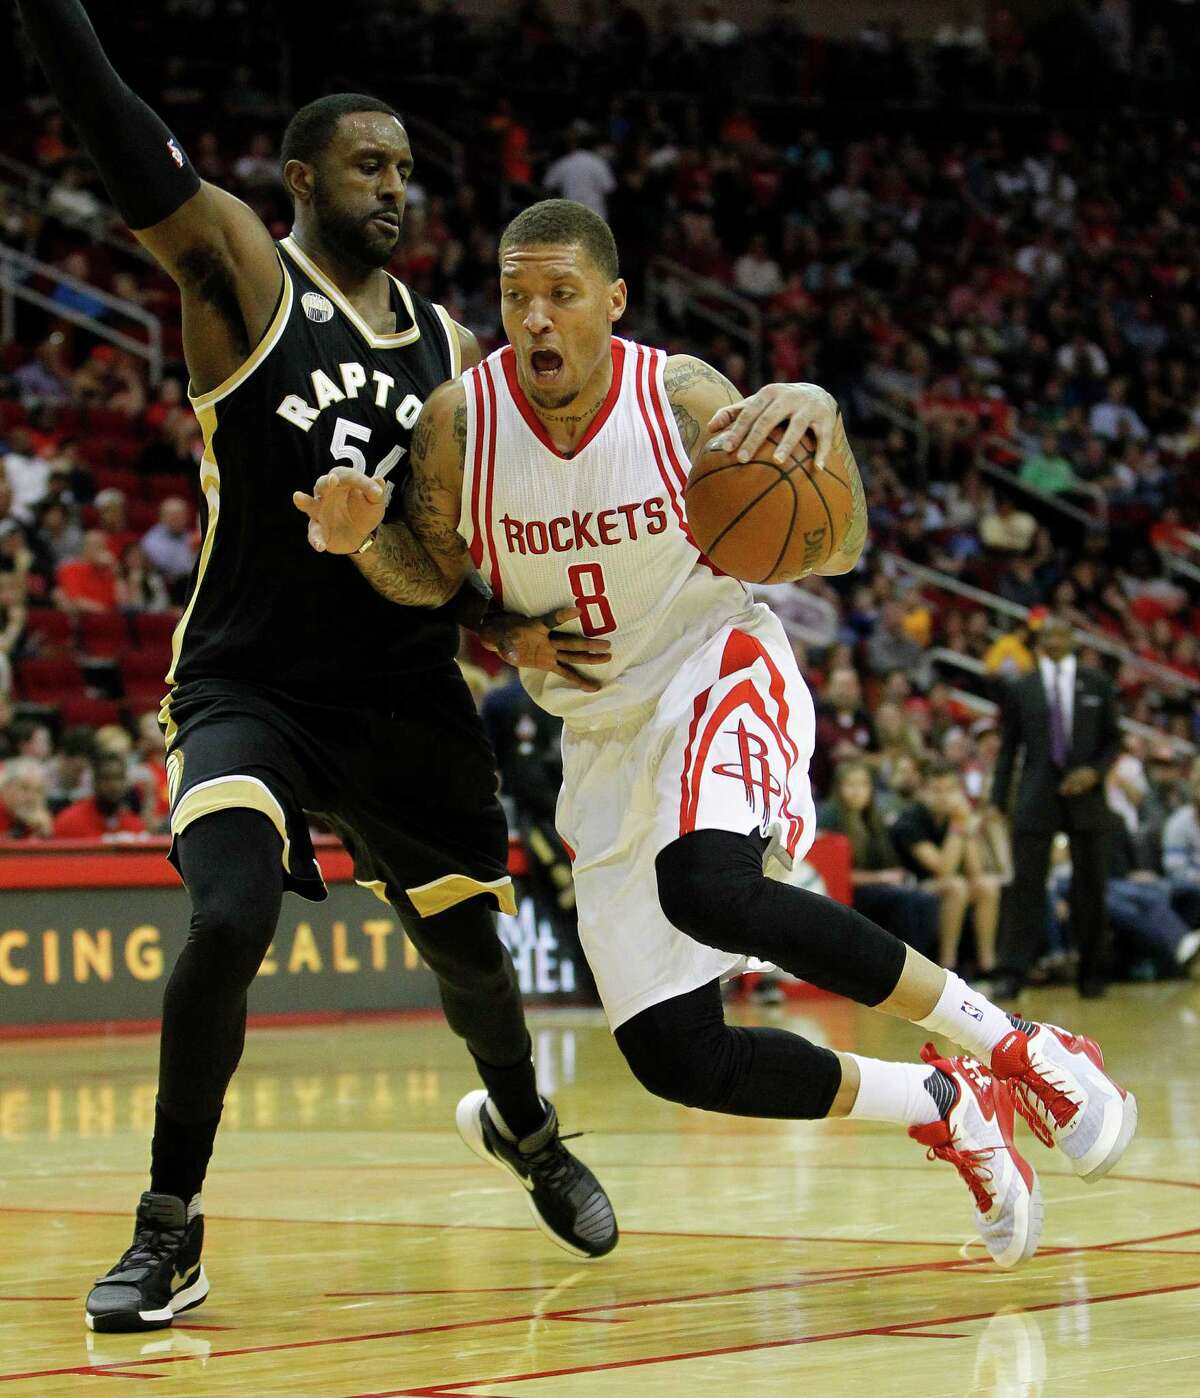 Rockets forward Michael Beasley has seen his time in the rotation increase of late.